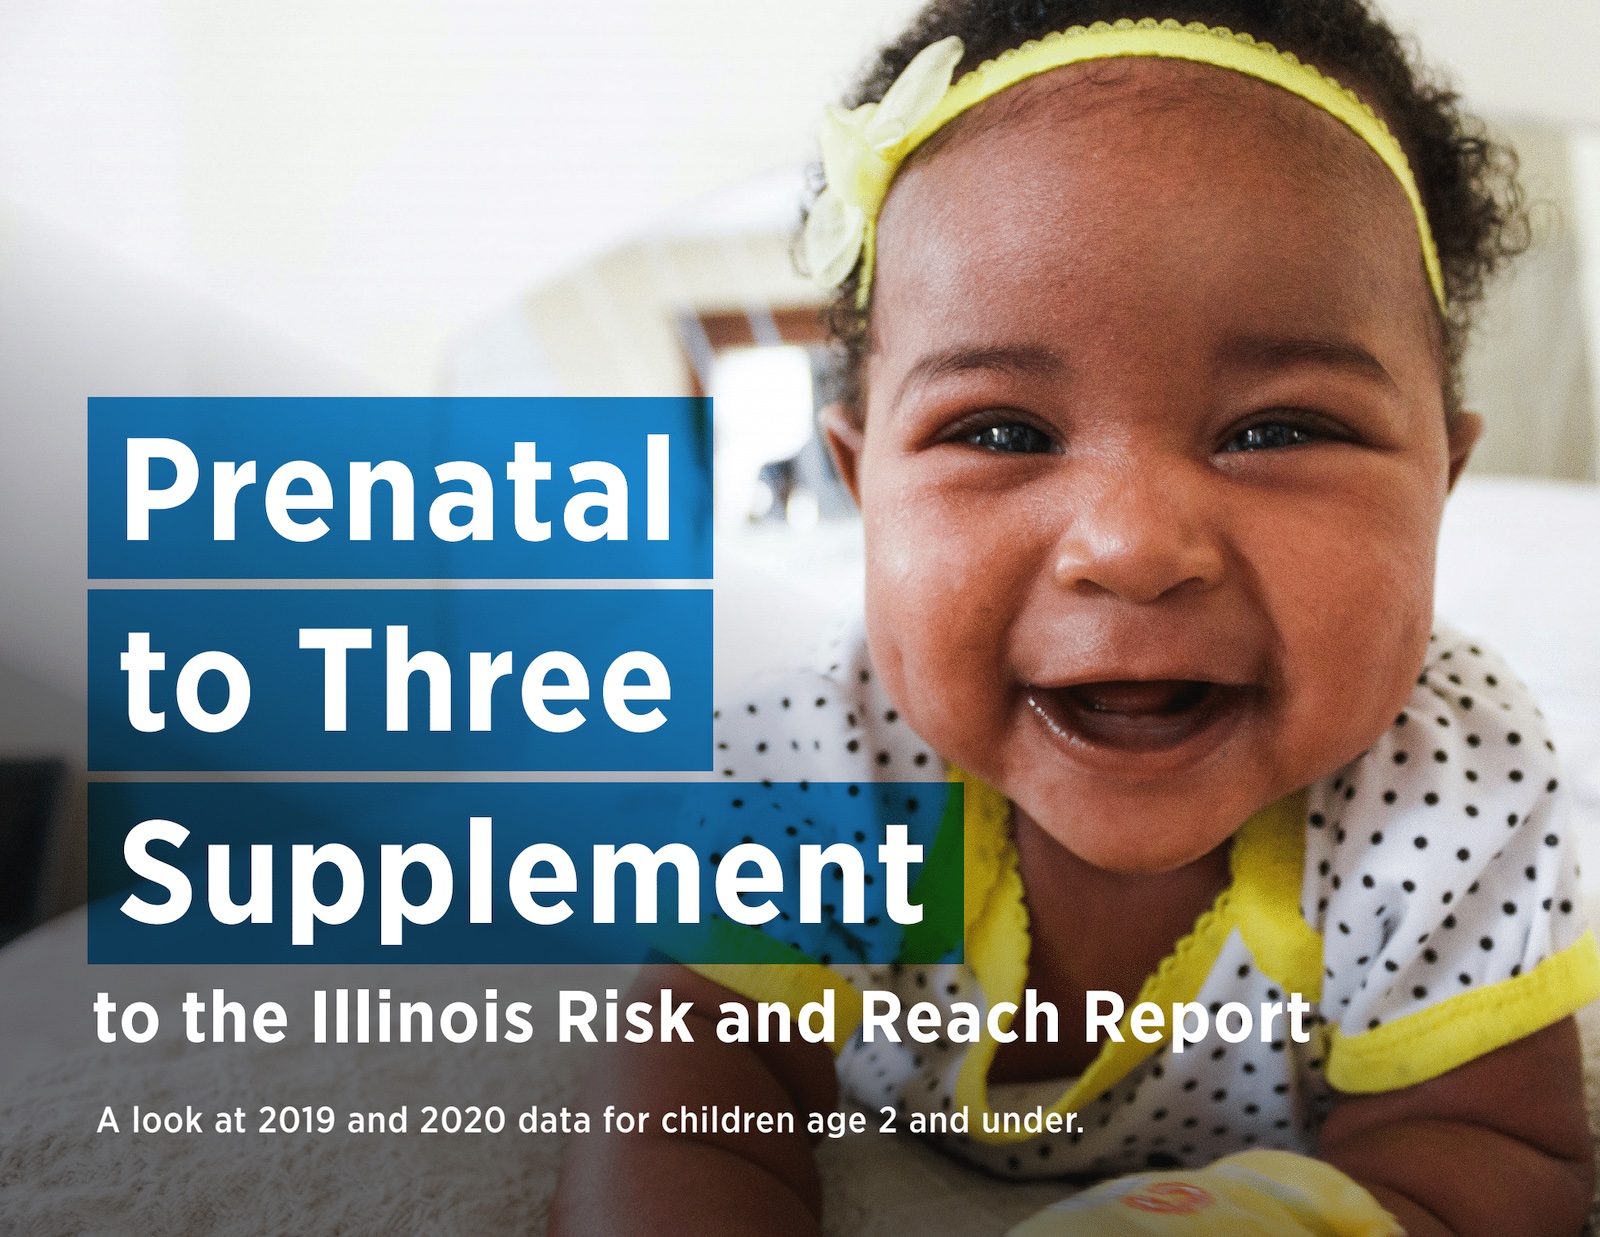 Download the Prenatal to Three Supplement